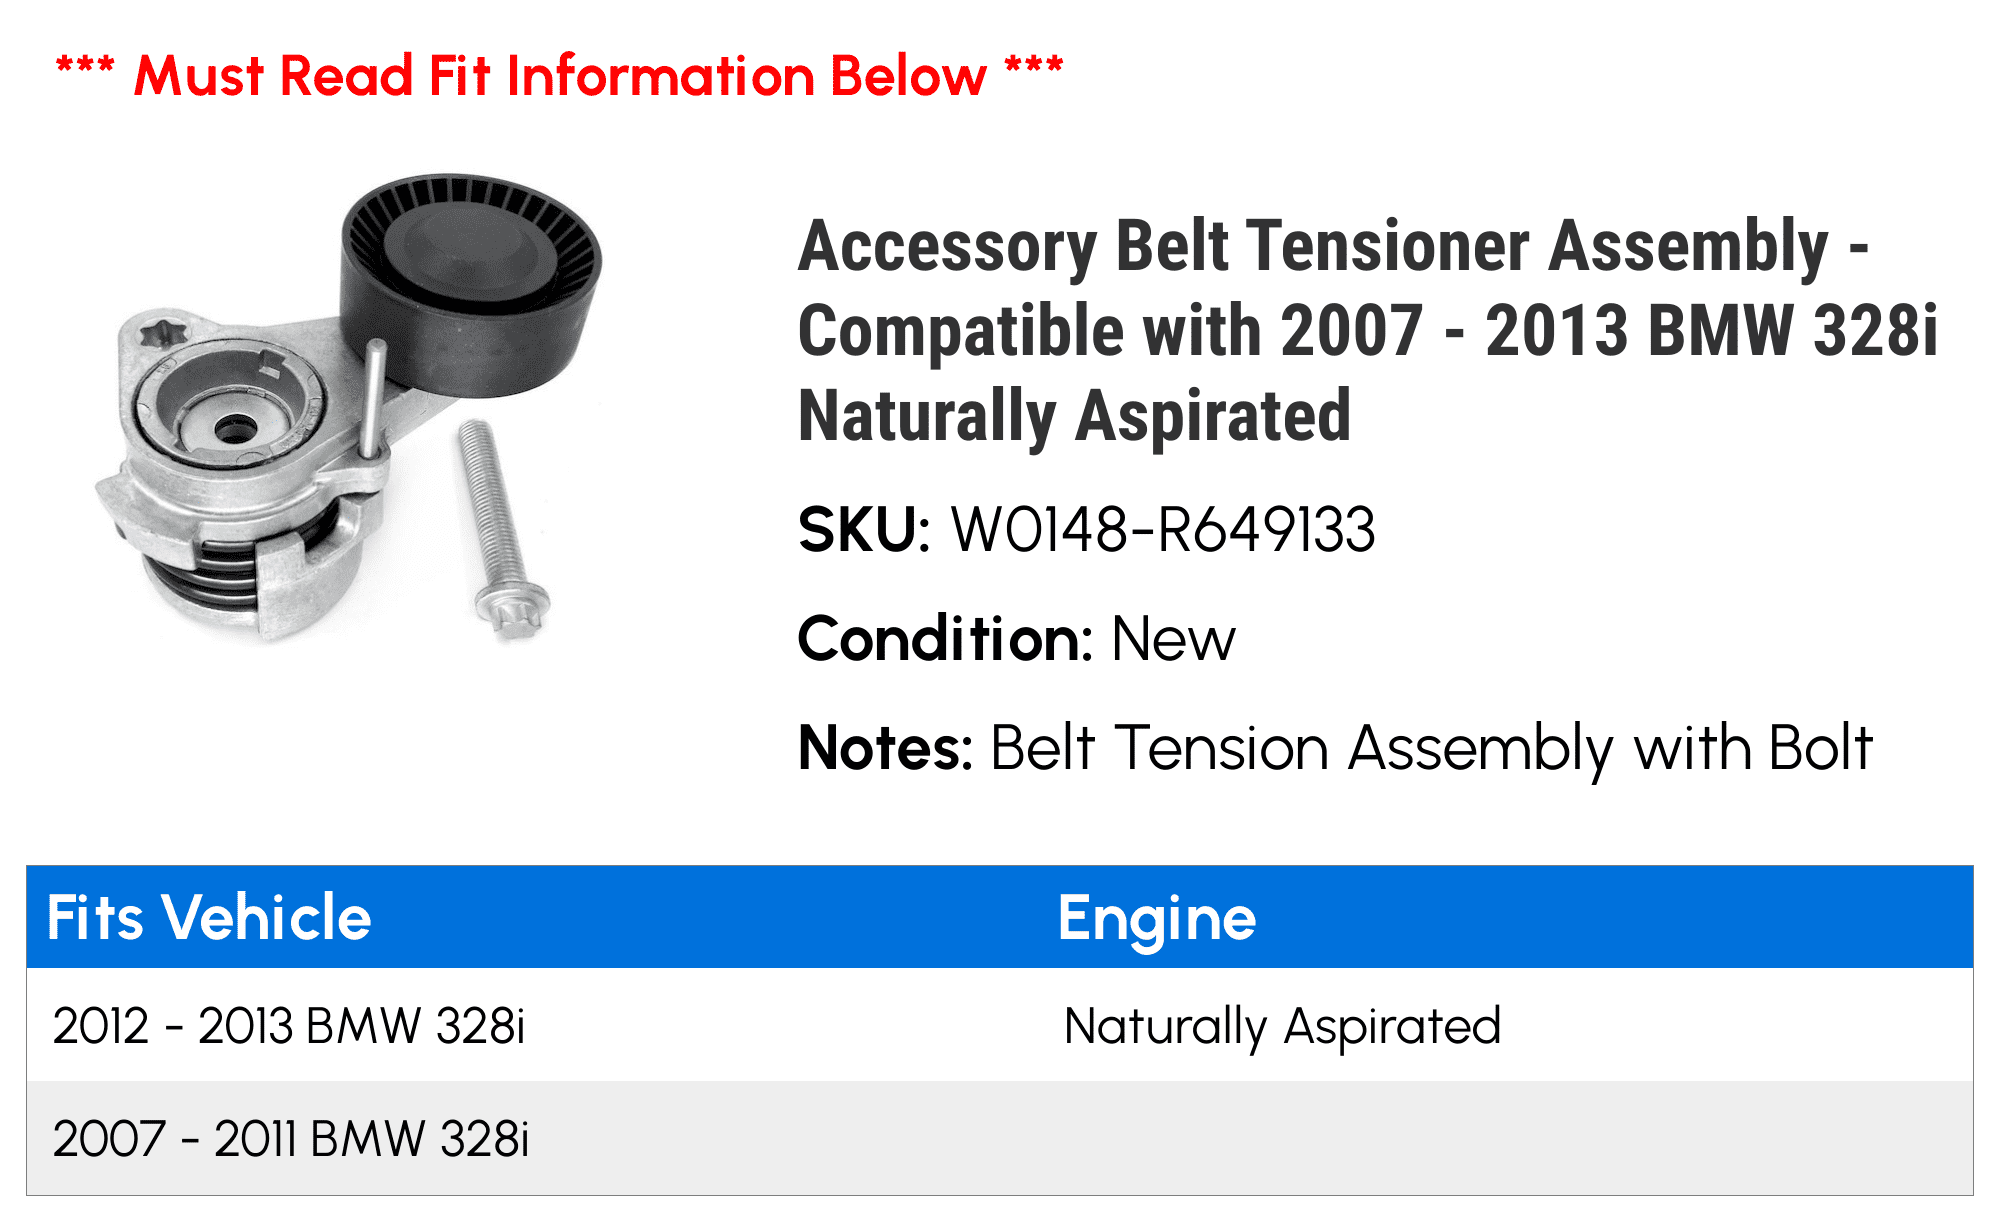 Accessory Belt Tensioner Assembly Compatible with 2007-2013 BMW 328i Naturally Aspirated 